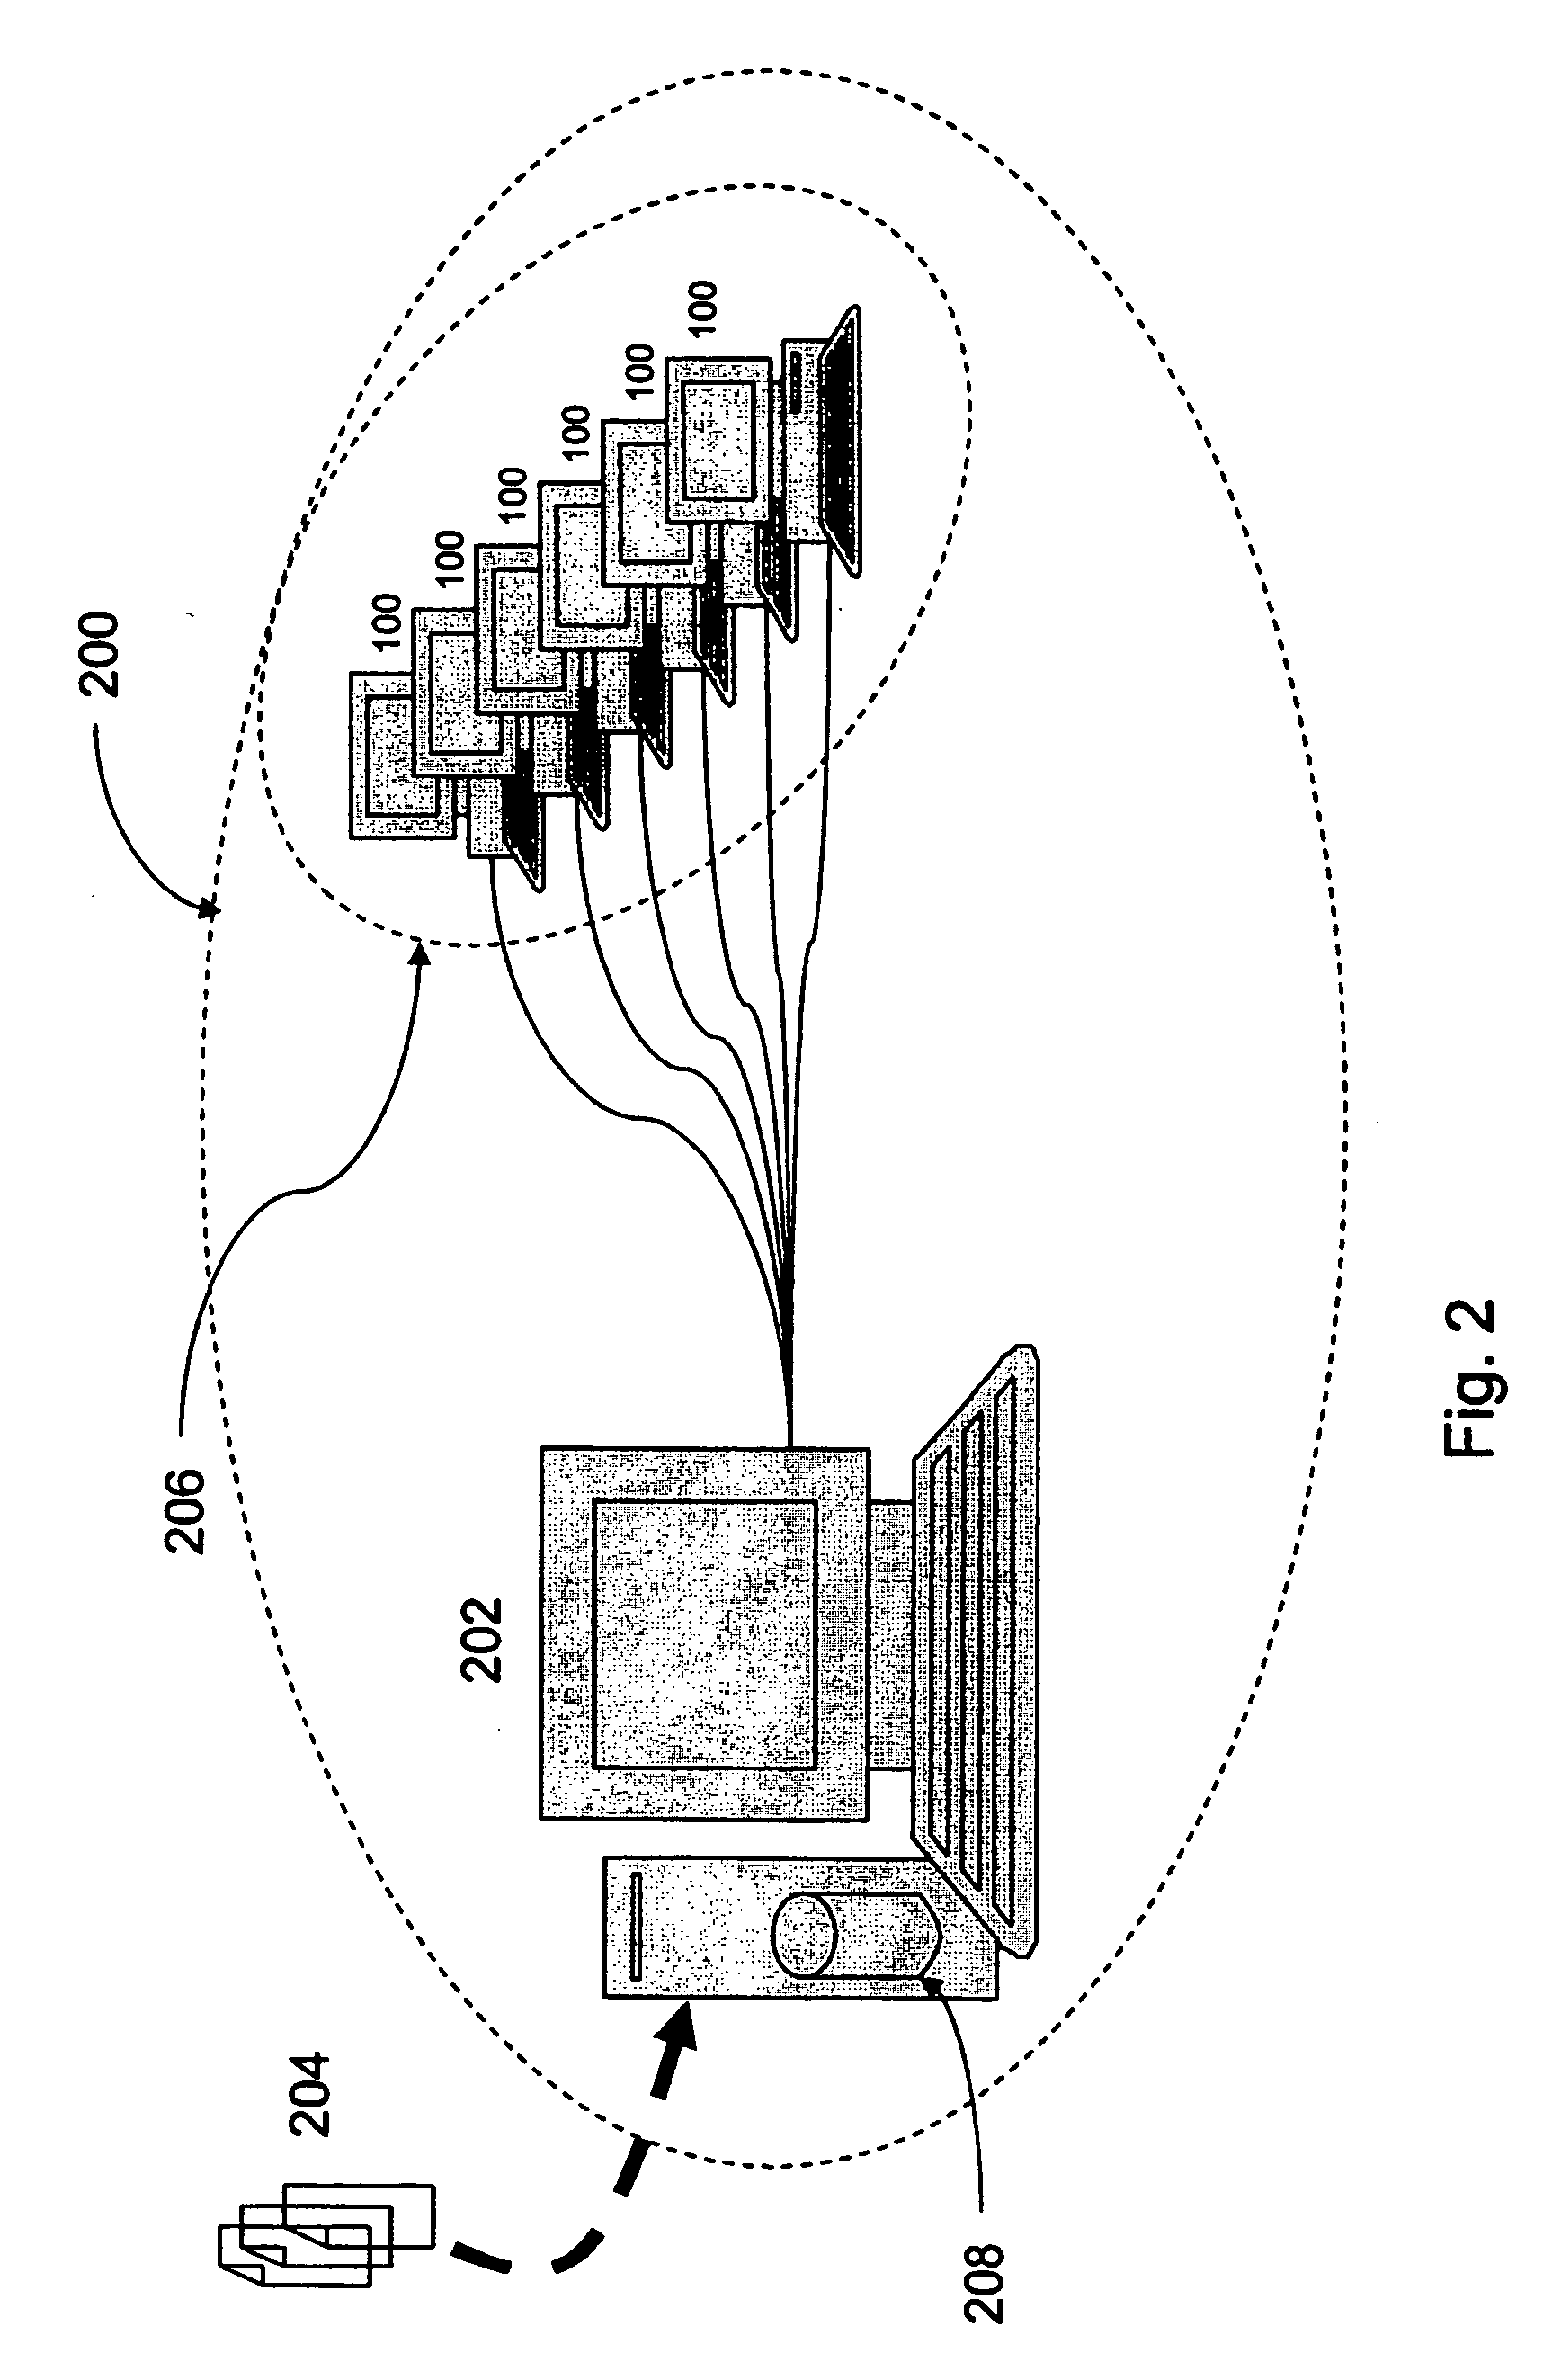 System and method for allocating transactions to a plurality of computing systems